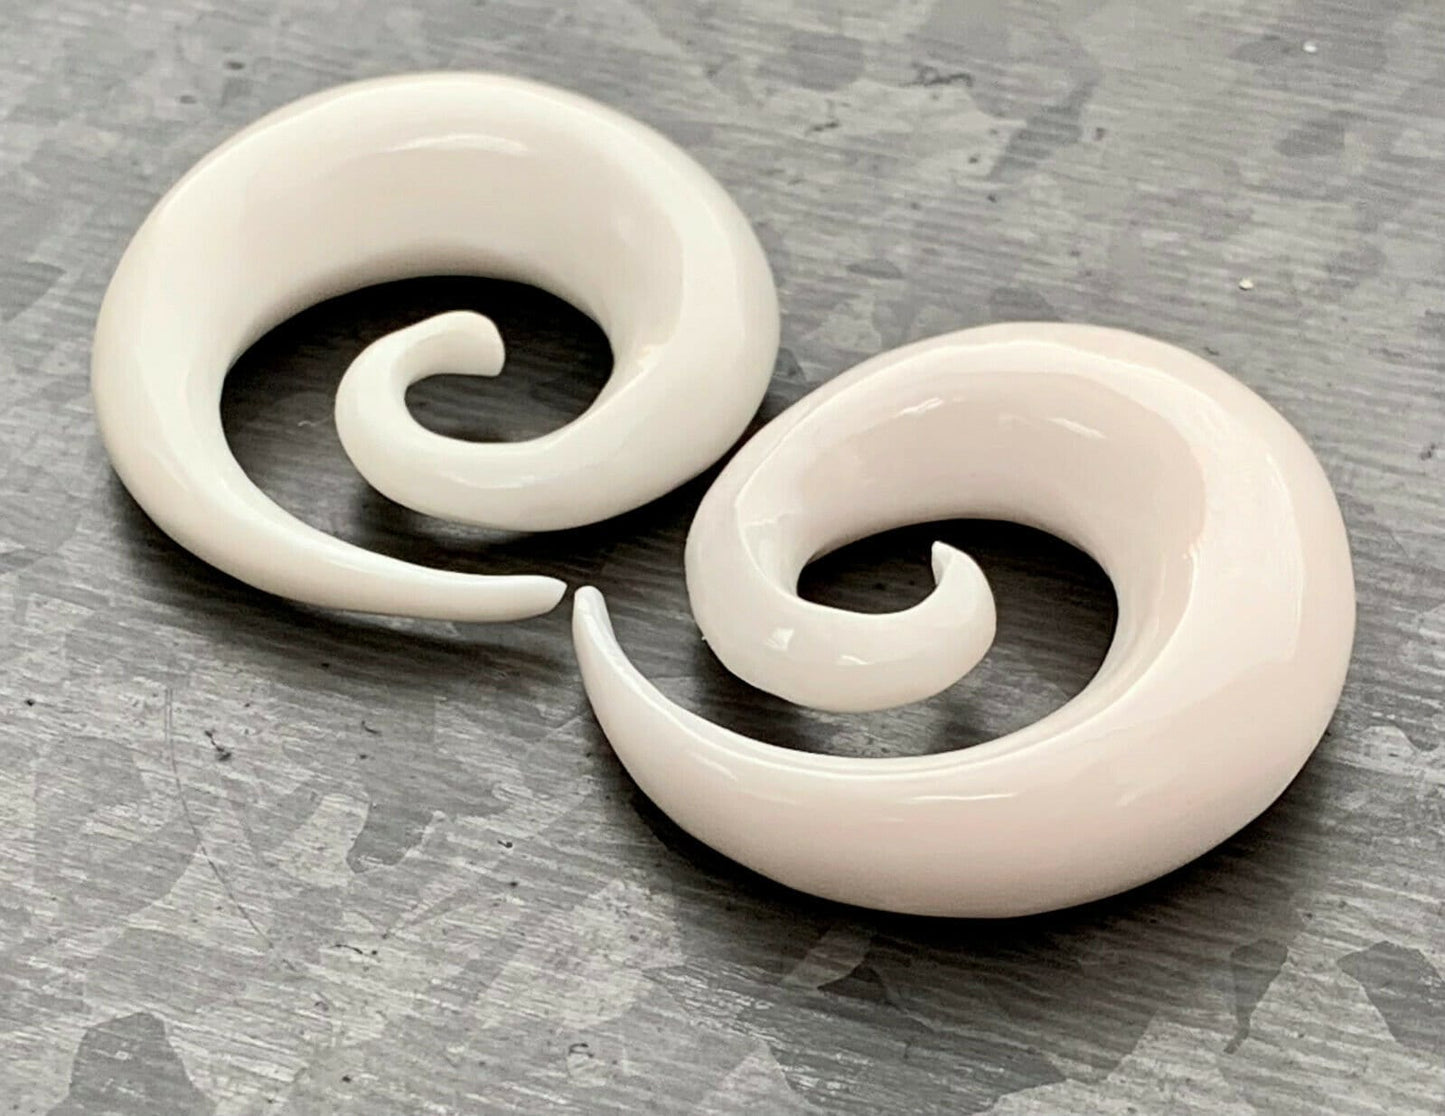 PAIR of Unique Organic Buffalo Bone Spiral Tapers/Plugs - Expanders - Gauges 8g (3mm) thru 00g (10mm) available!